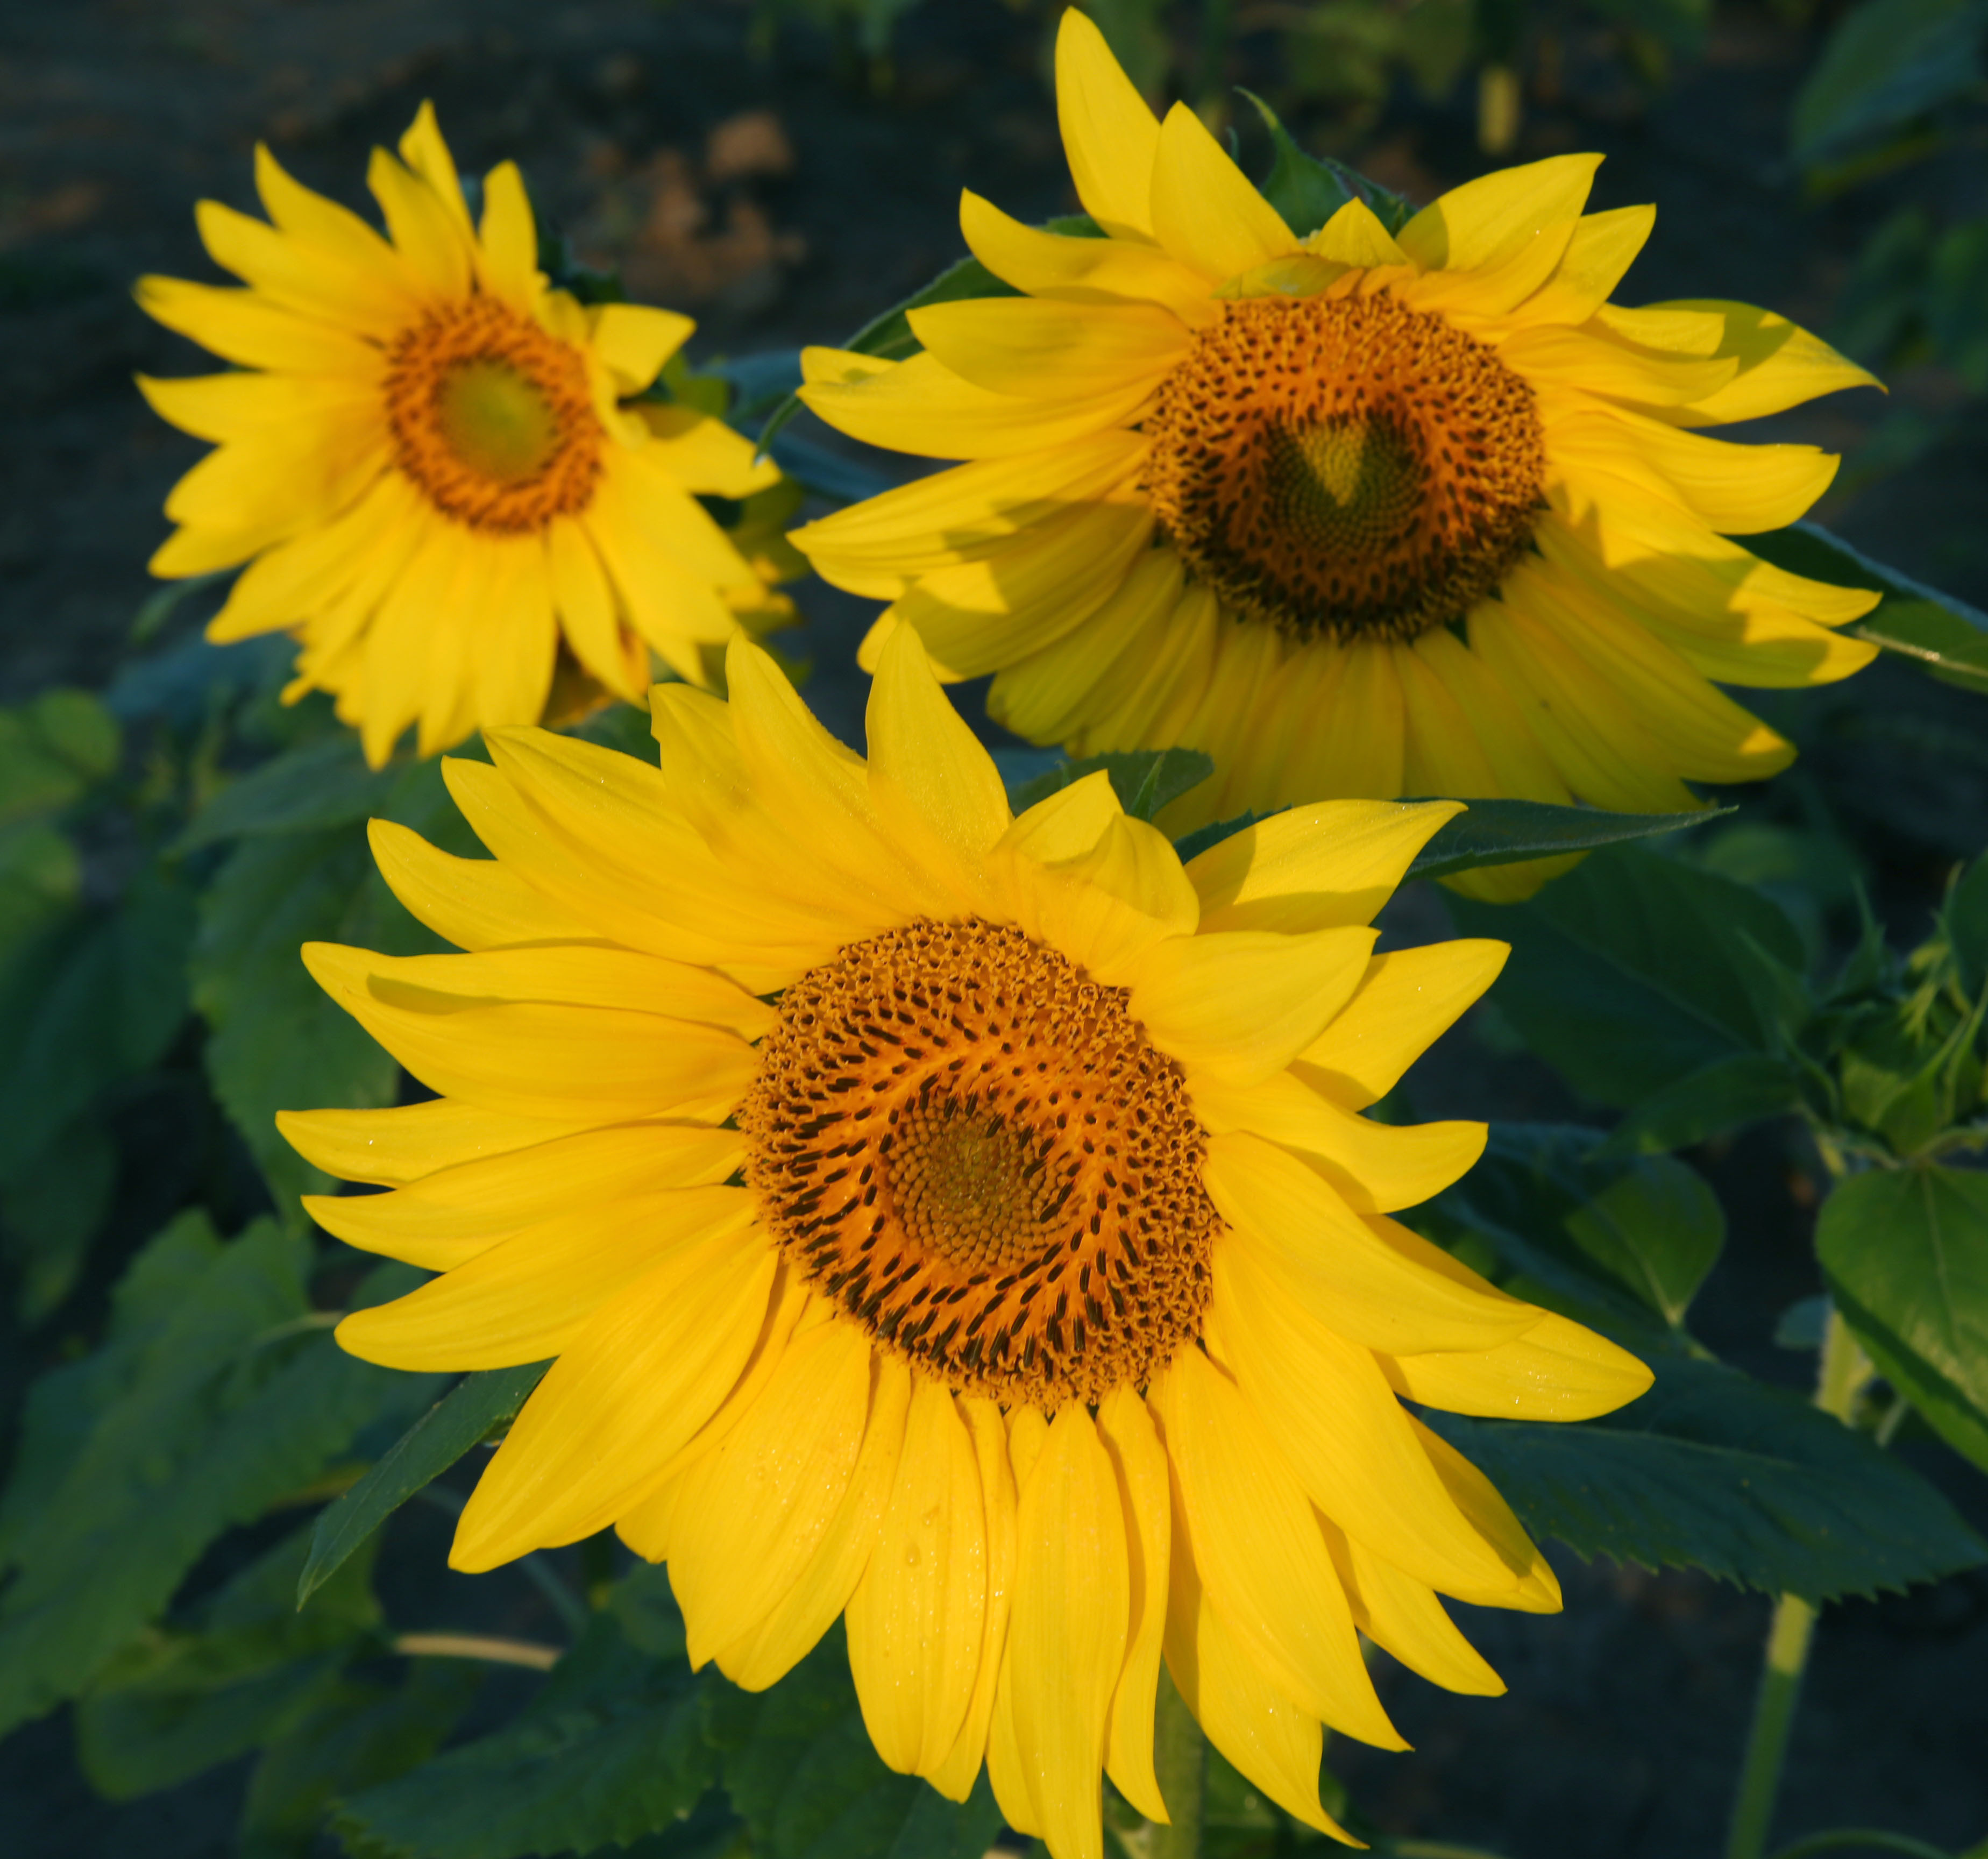 Sunflowers in bloom at Angiuli's Farm Market 